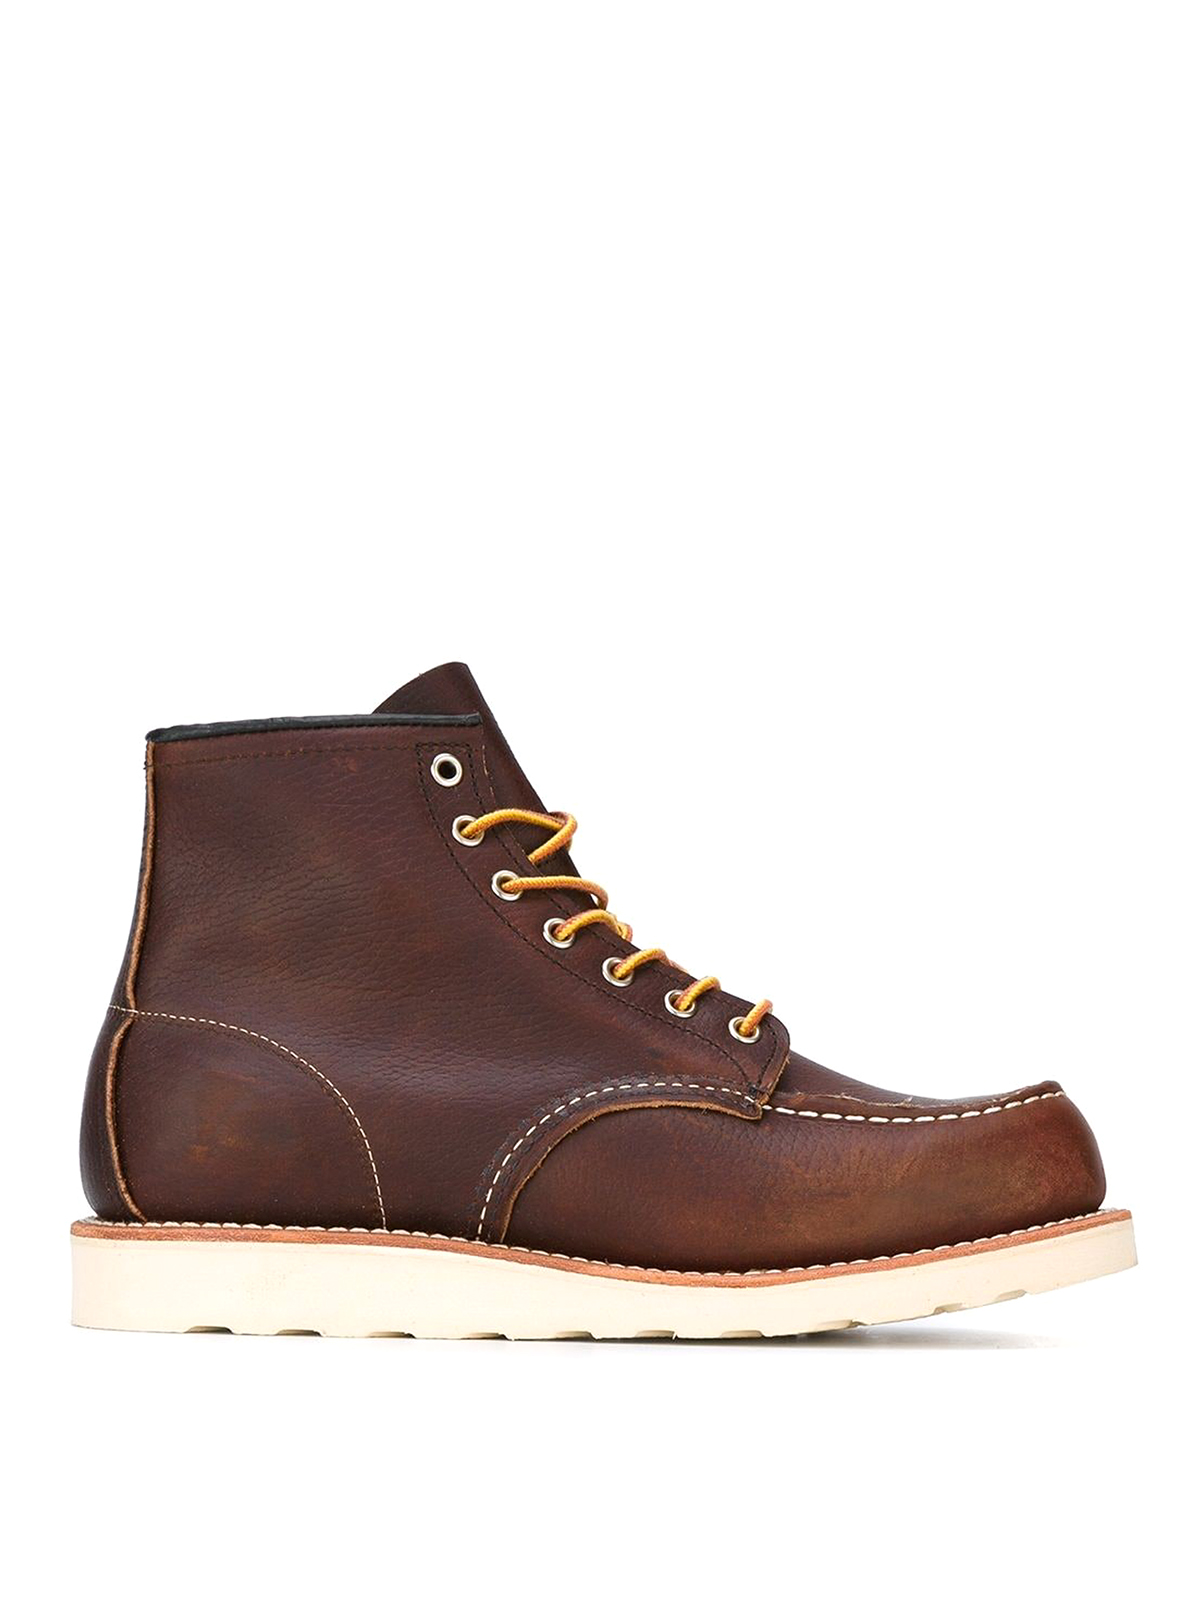 RED WING SHOES LEATHER LACE-UPS